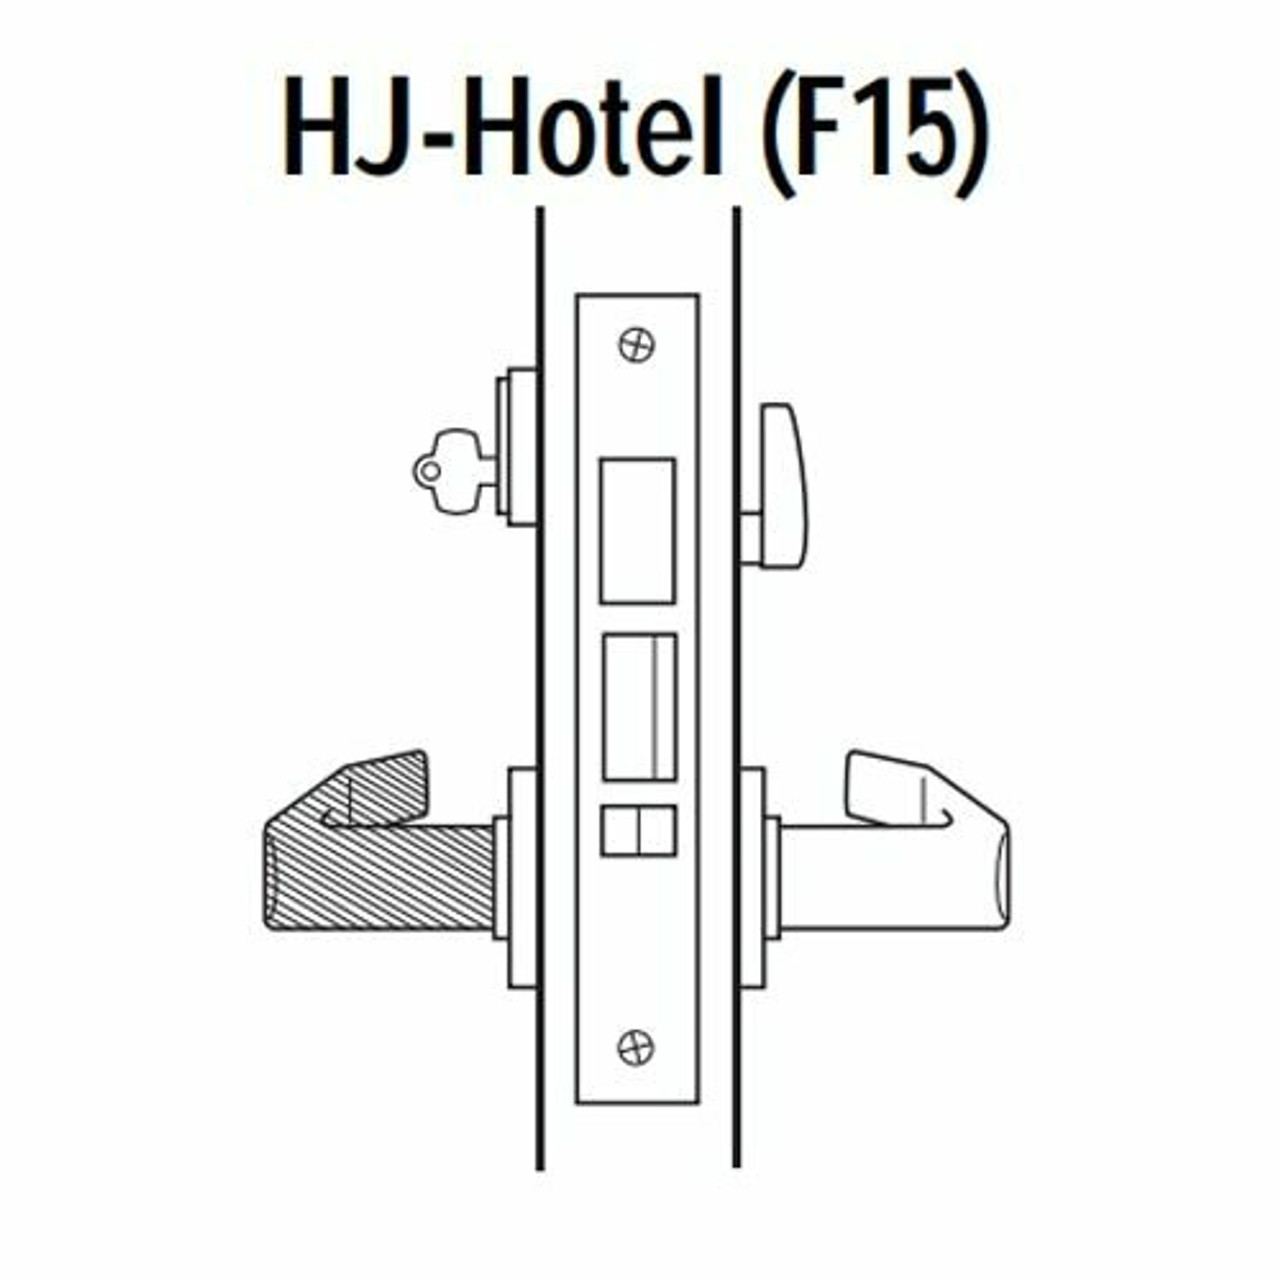 45H7HJ17RN622 Best 40H Series Hotel with Deadbolt Heavy Duty Mortise Lever Lock with Gull Wing RH in Black